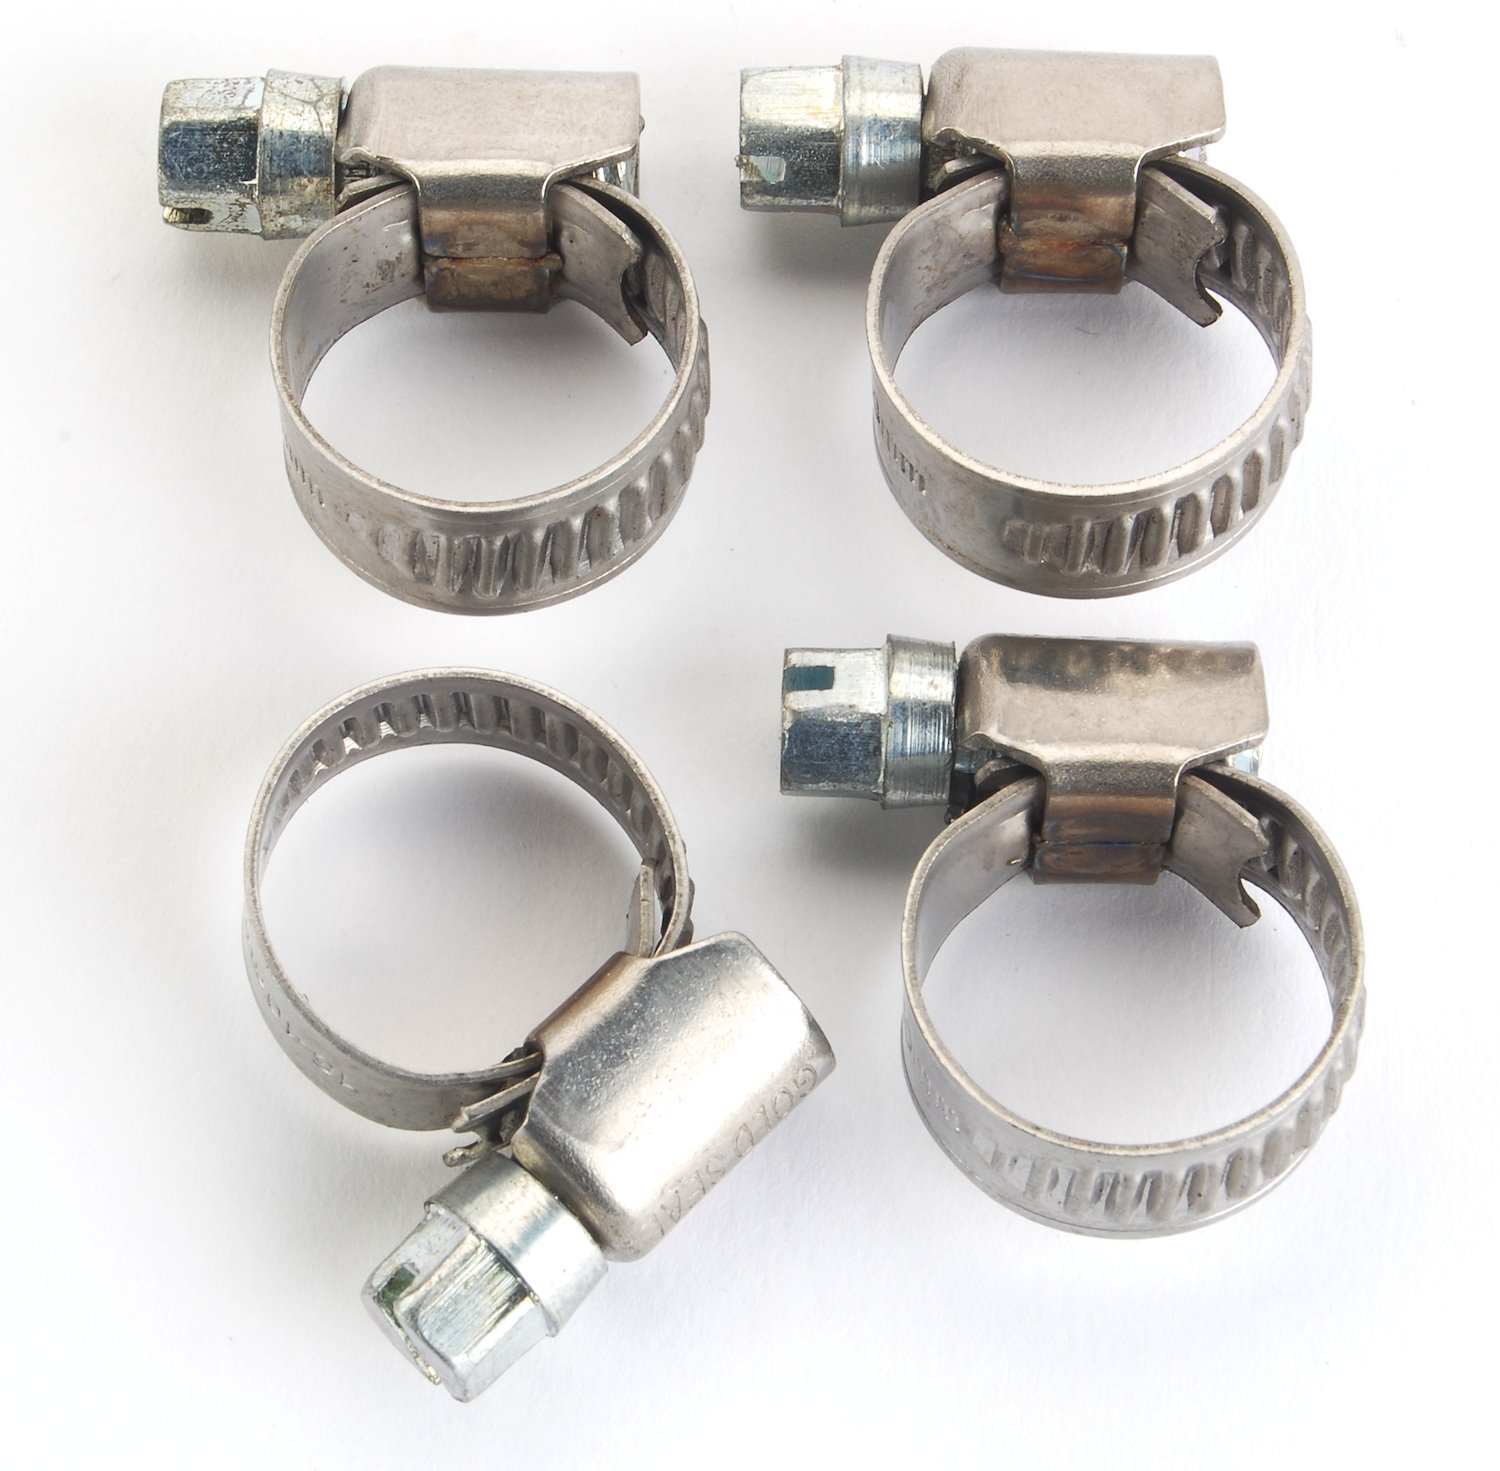 Stainless Steel Hose Clamps 3/8 in. to 5/8 in. OD